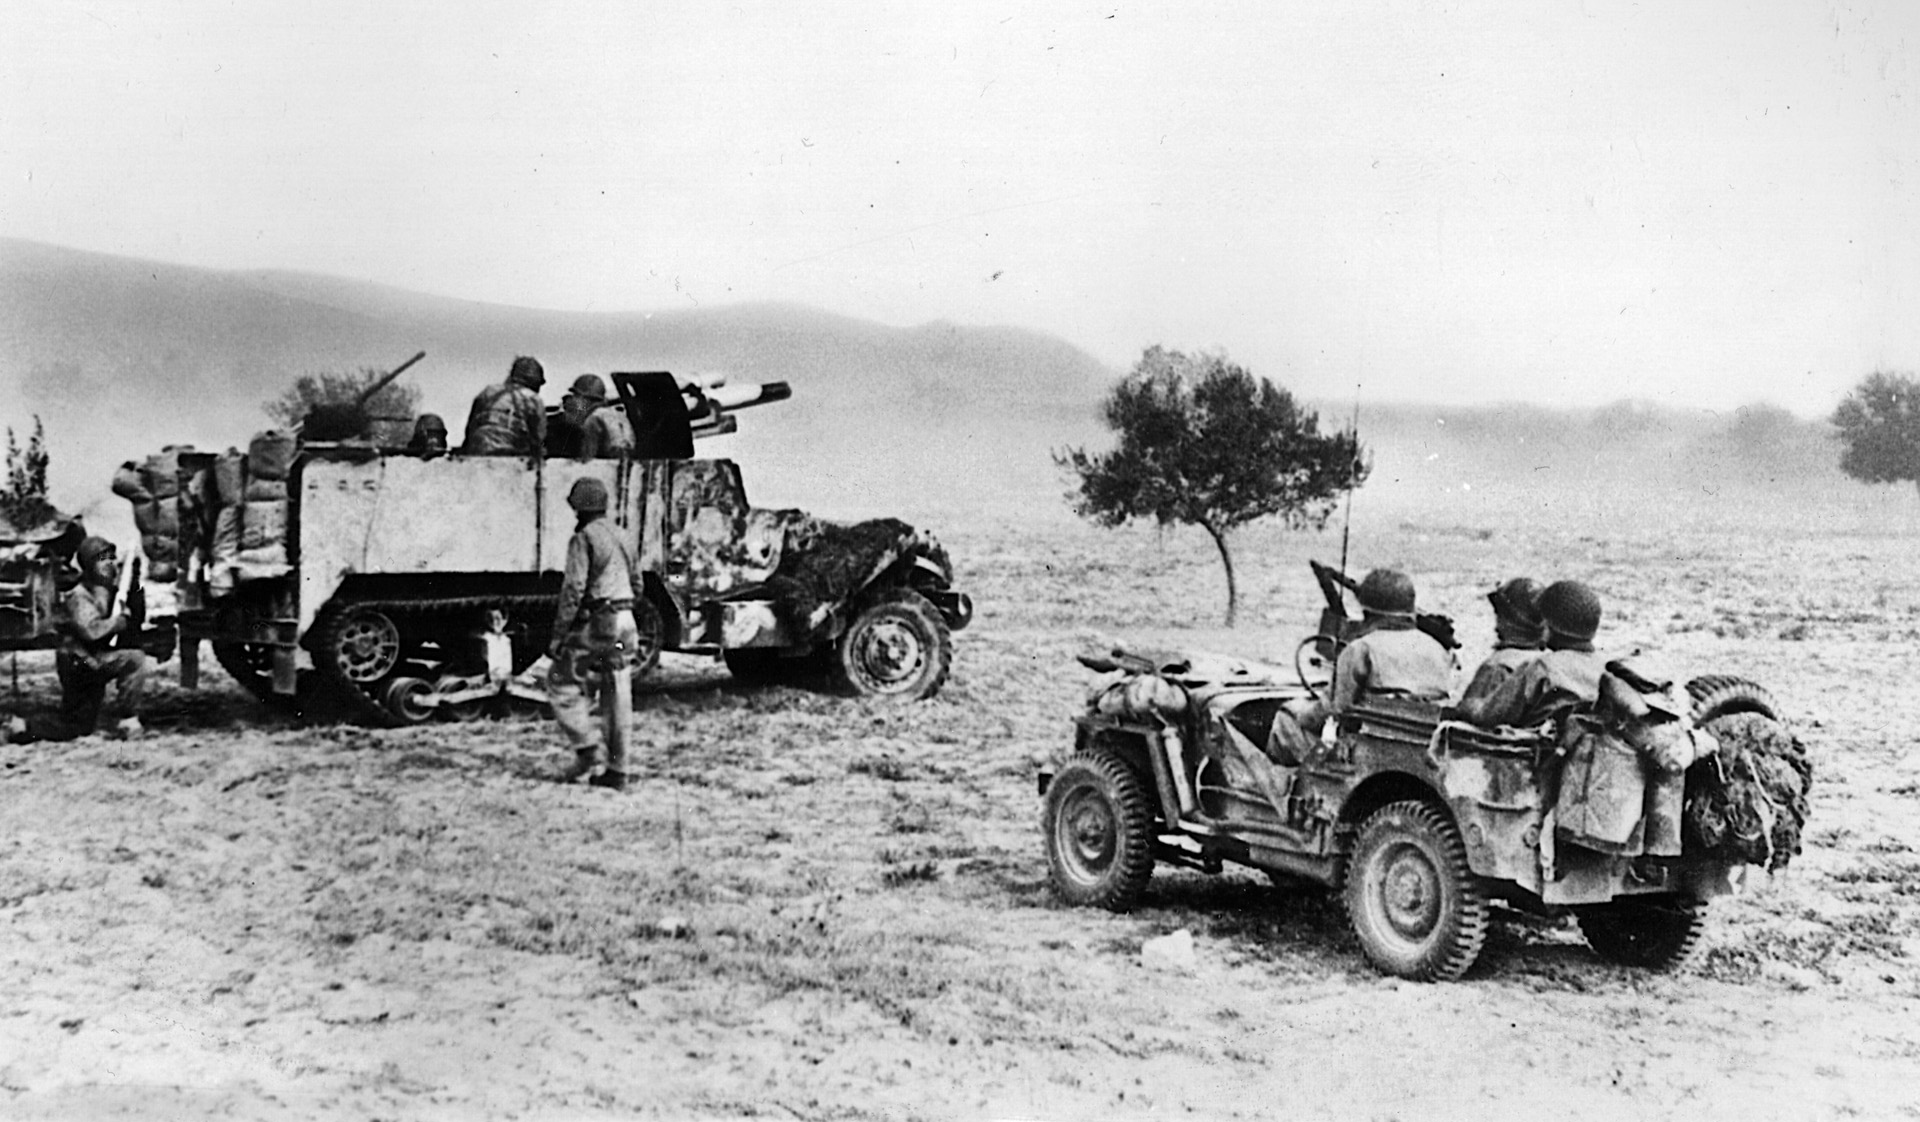 A U.S. half track mounting a heavy gun battles Axis forces in Tunisia. The Germans had superior armor and training that enabled them to prevail in their initial attack. 